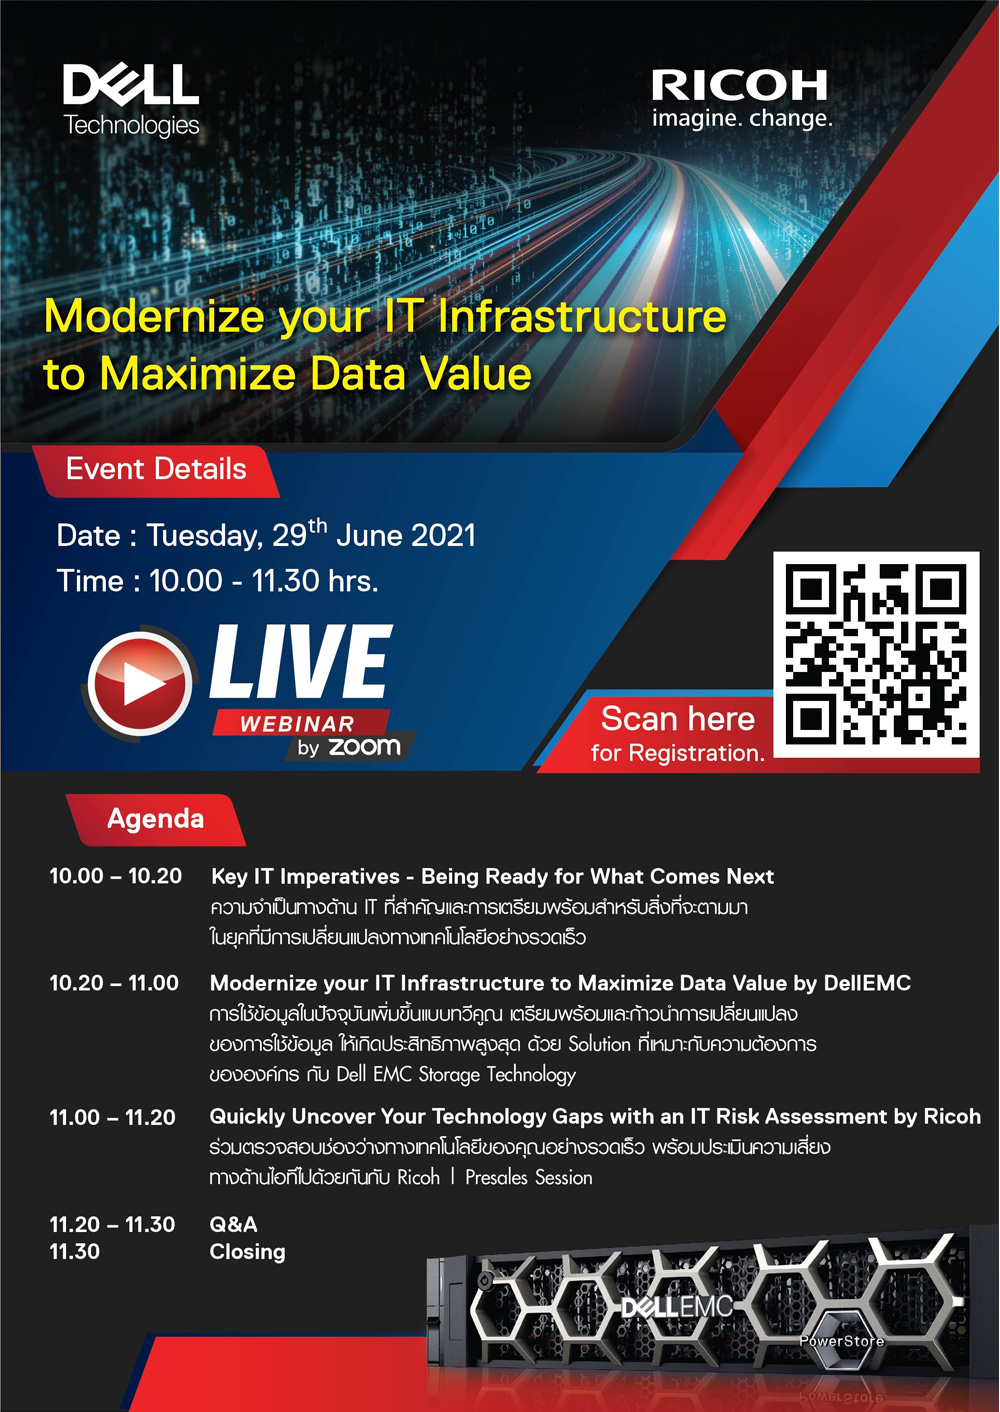 Modernize your IT Infrastructure to Maximize Data Value